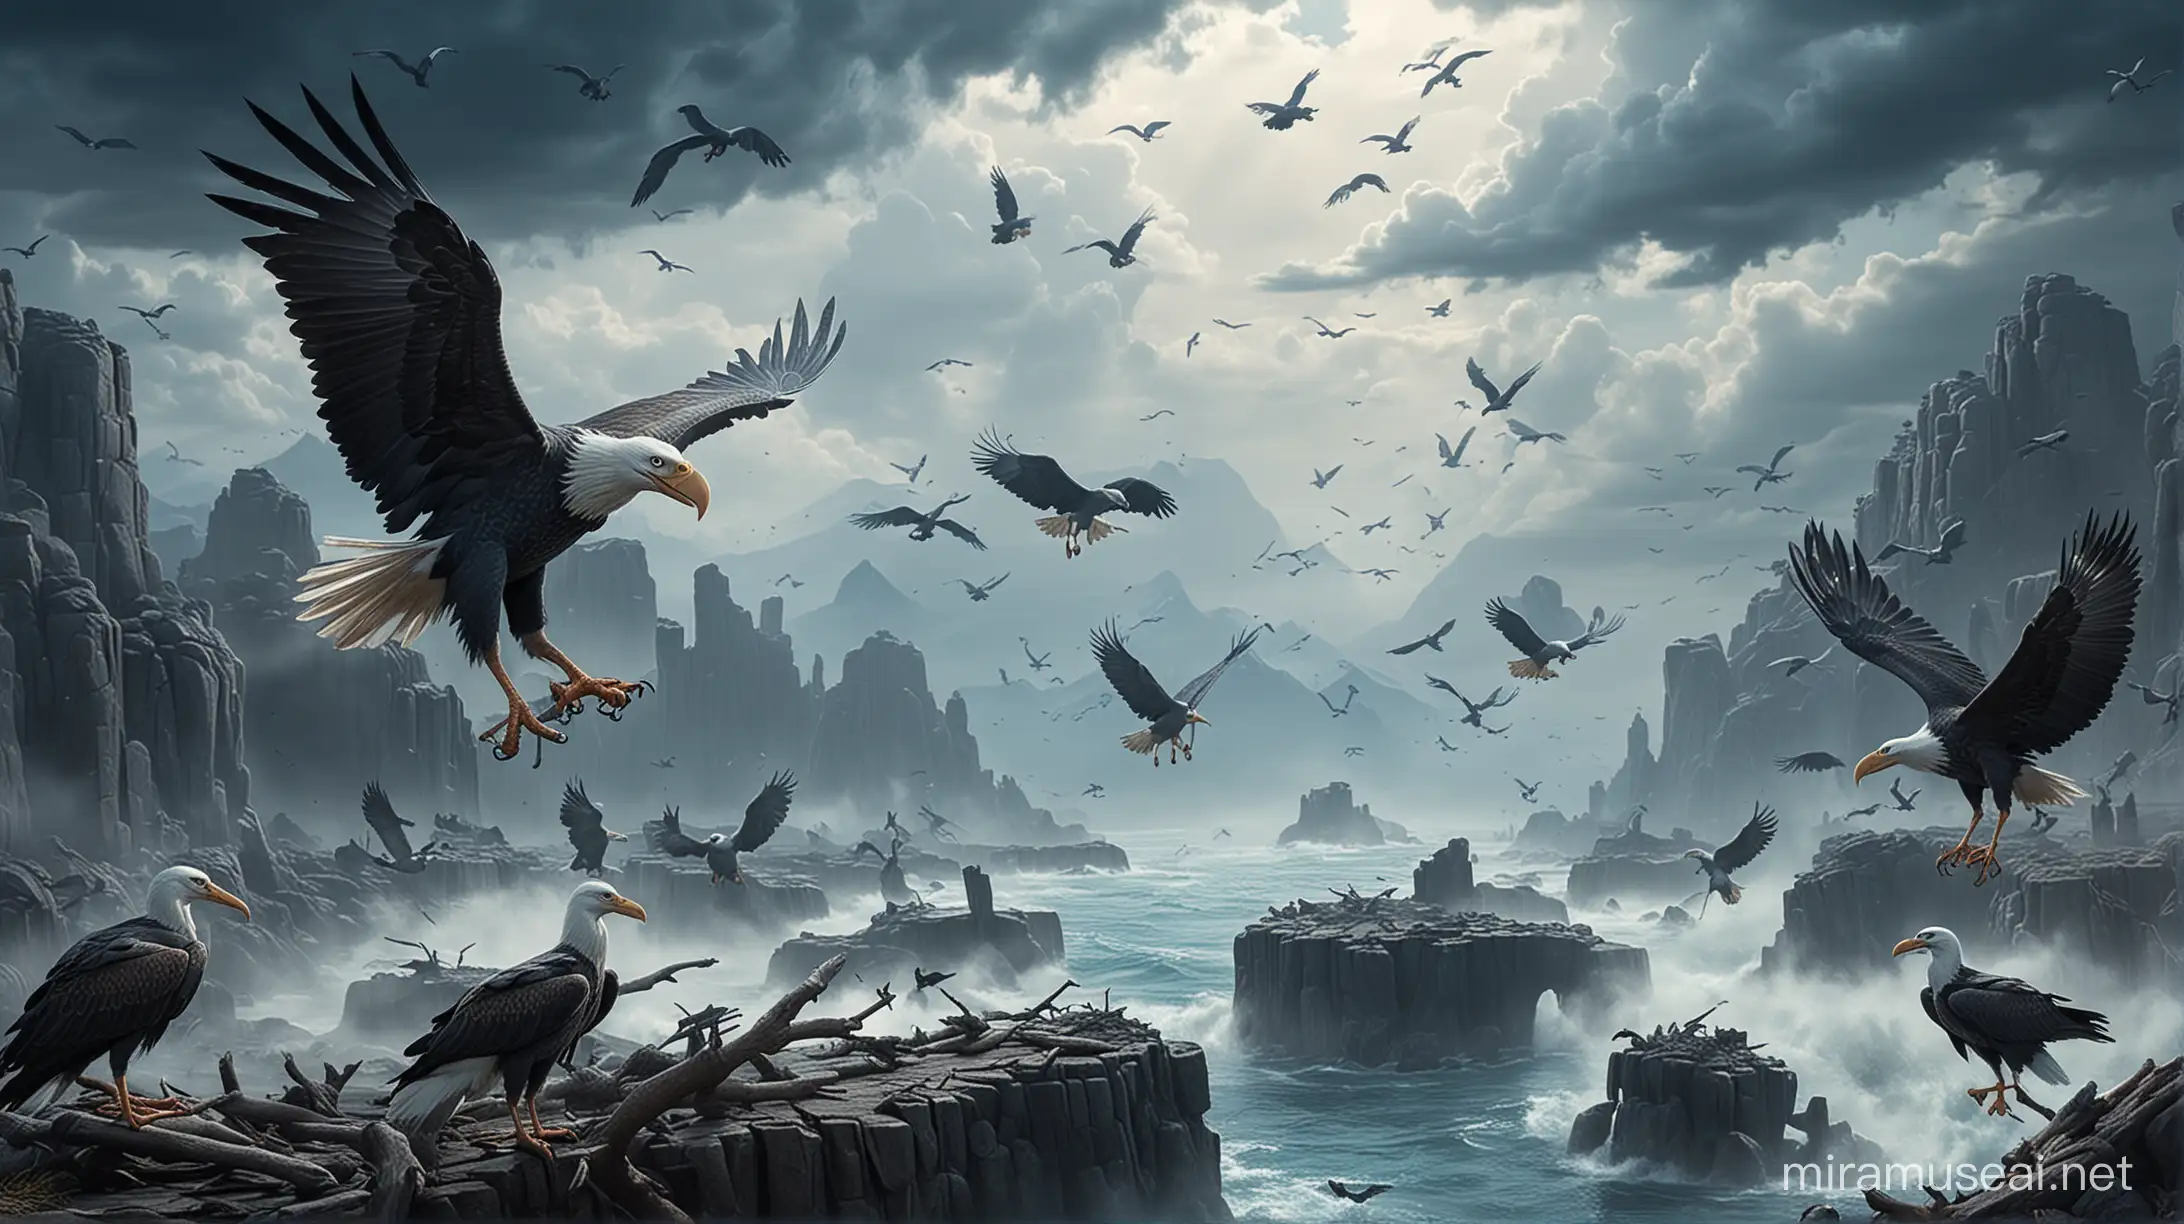 Create a battle scene background with storks and eagles, with blue as the dominant color tone.
